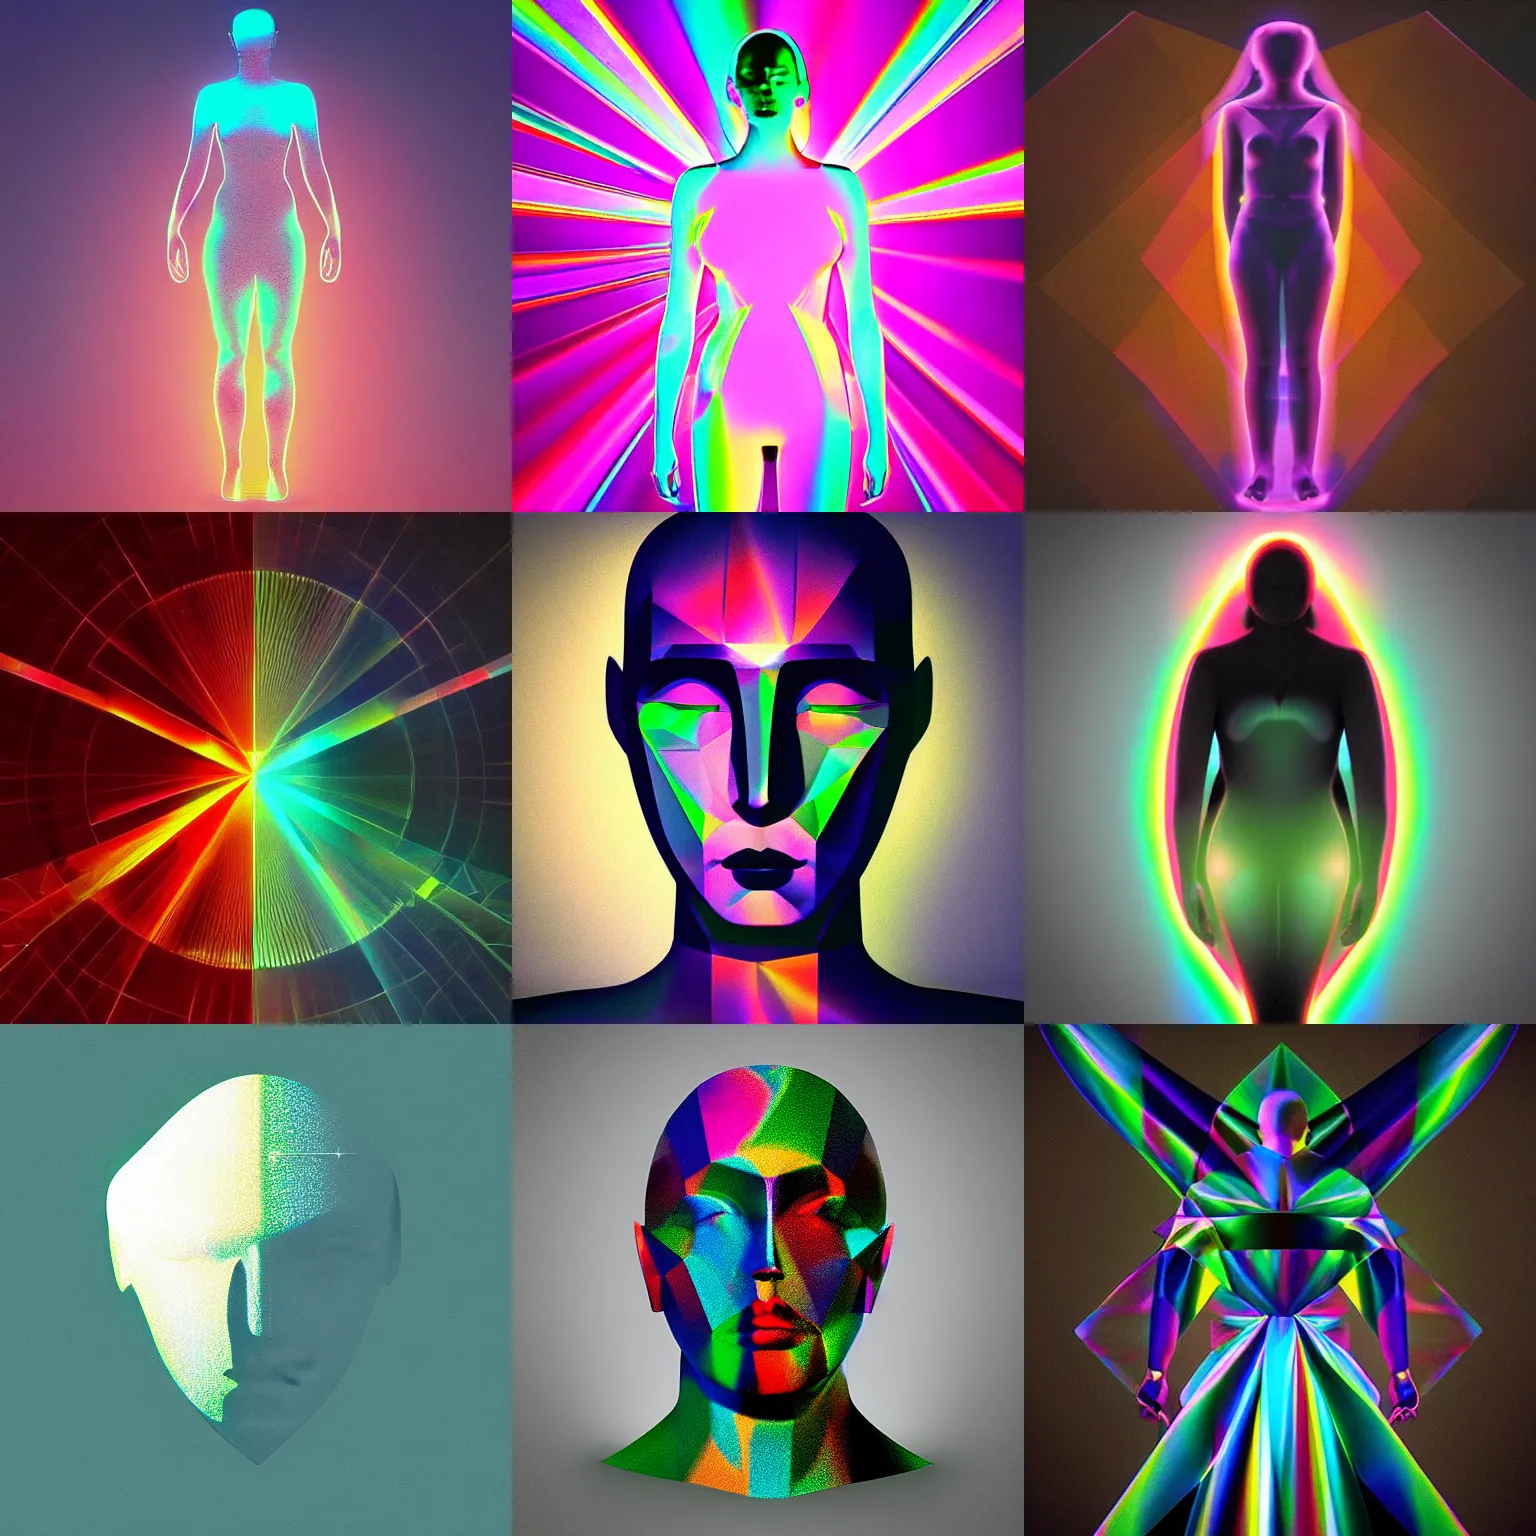 Prompt: “Prism in the shape of a human figure, light beam refraction, epic, 4k, featured on Behance”